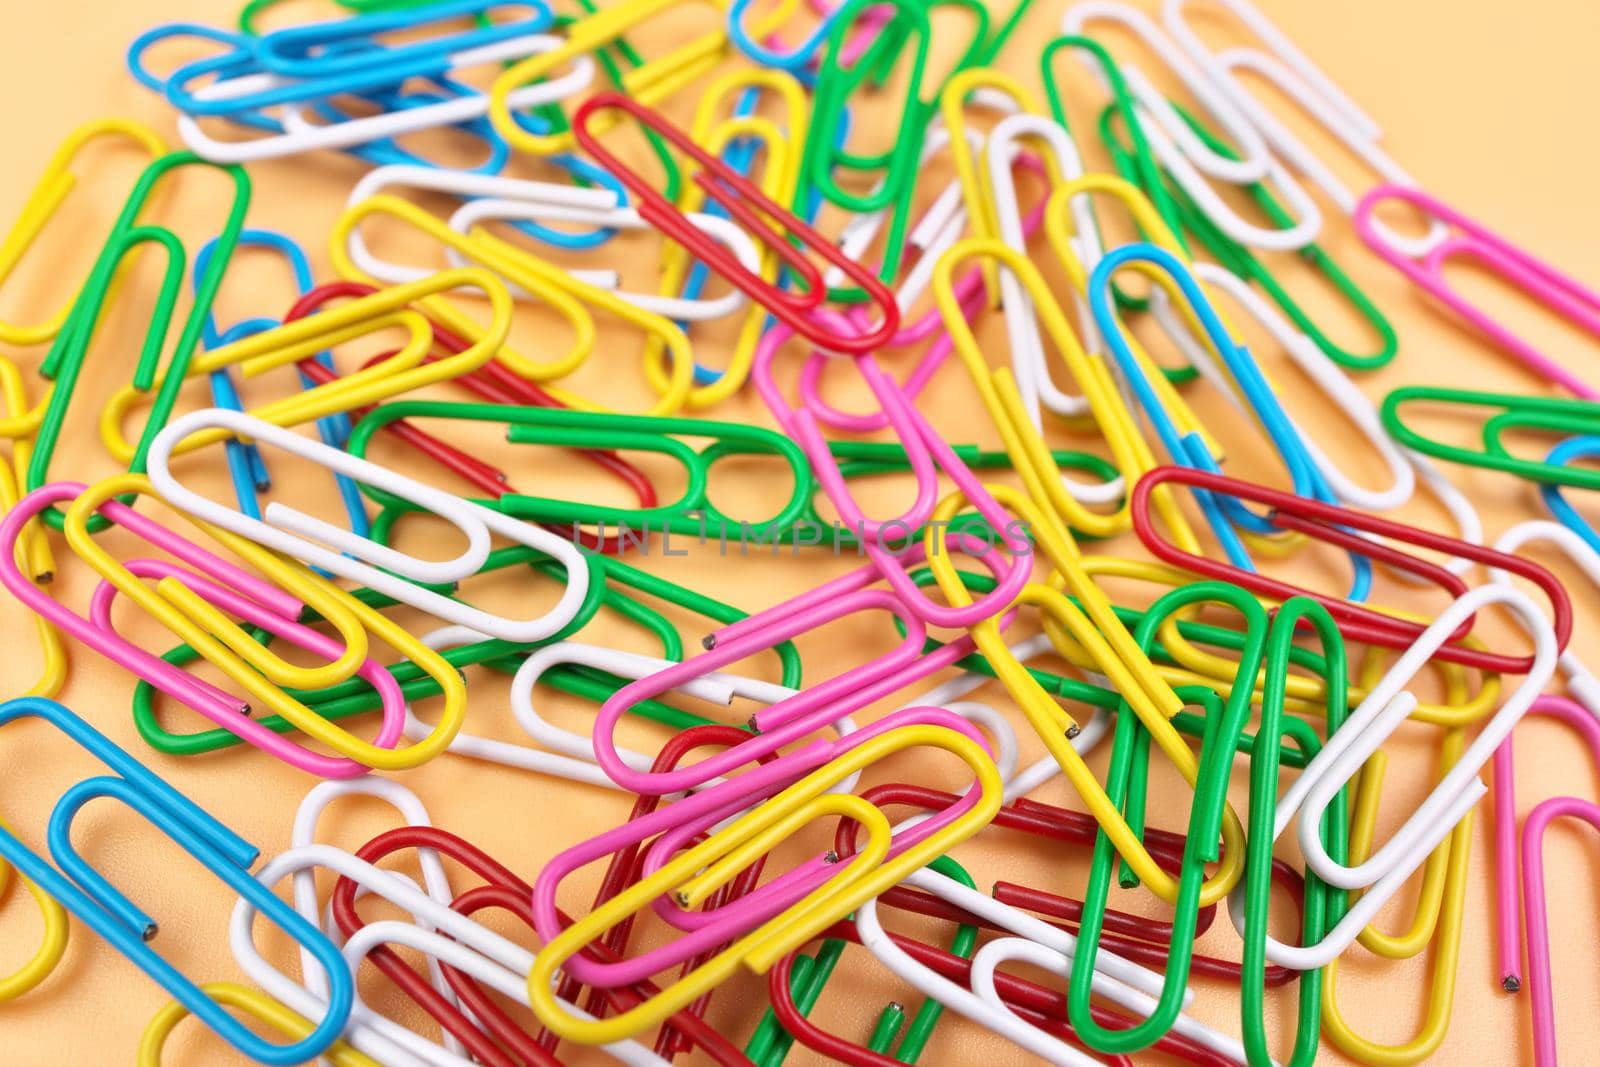 Full Frame High Angle View of Multicolored Paperclips Isolated on a Cheerful Orange Beige Background with shallow depth of field. High quality photo